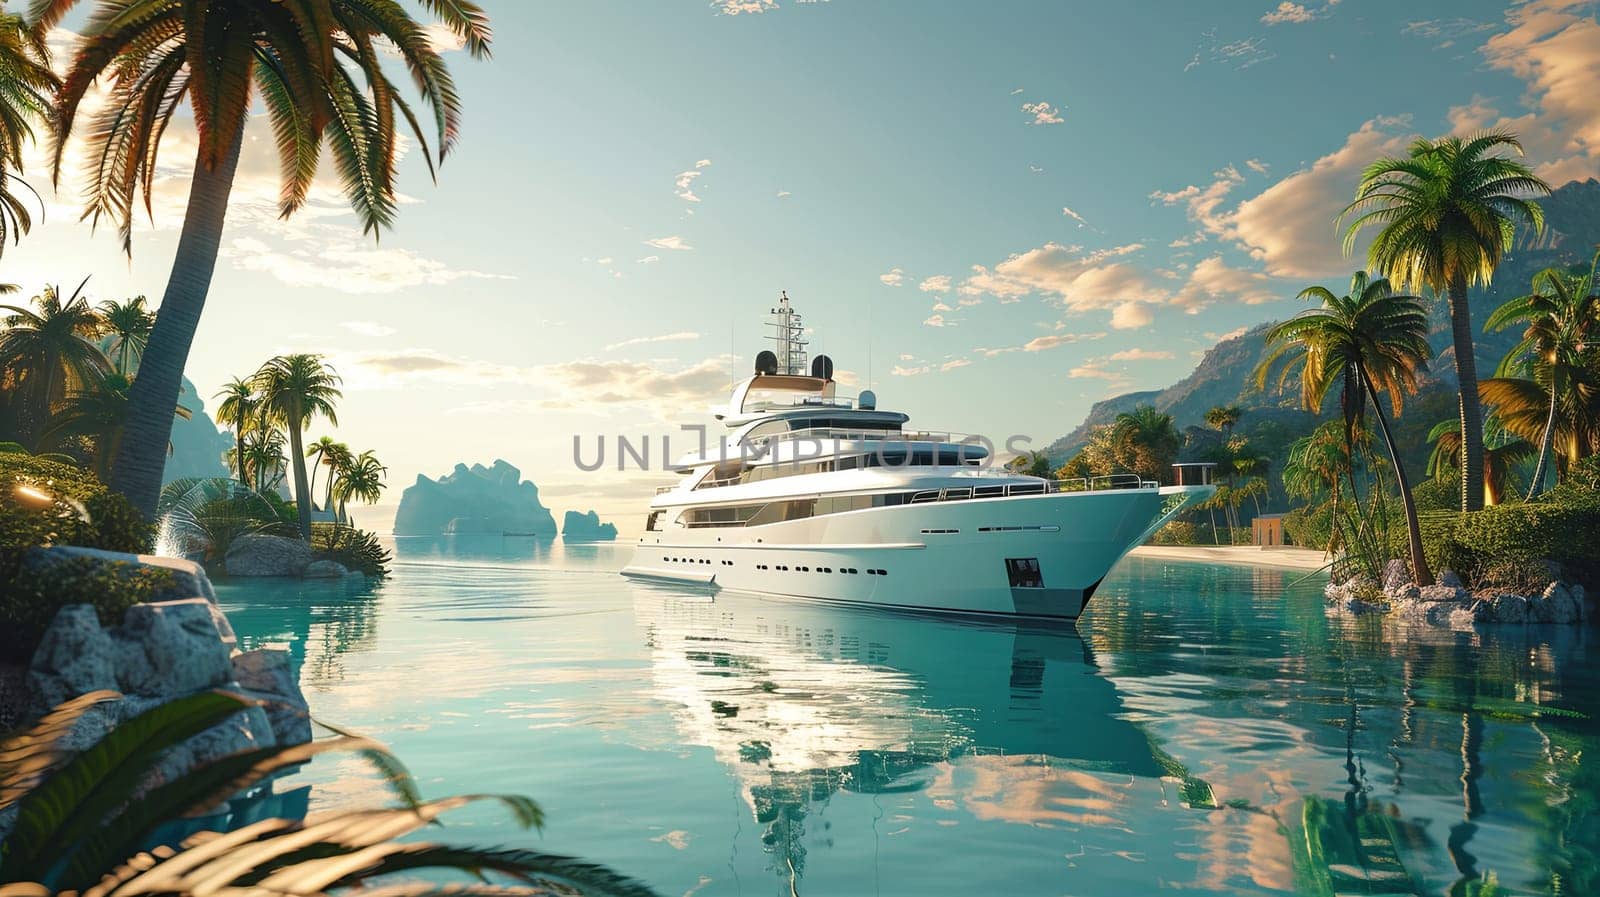 A luxurious white yacht gracefully glides across the calm water of a tranquil lagoon, framed by lush palm trees swaying in the gentle breeze.